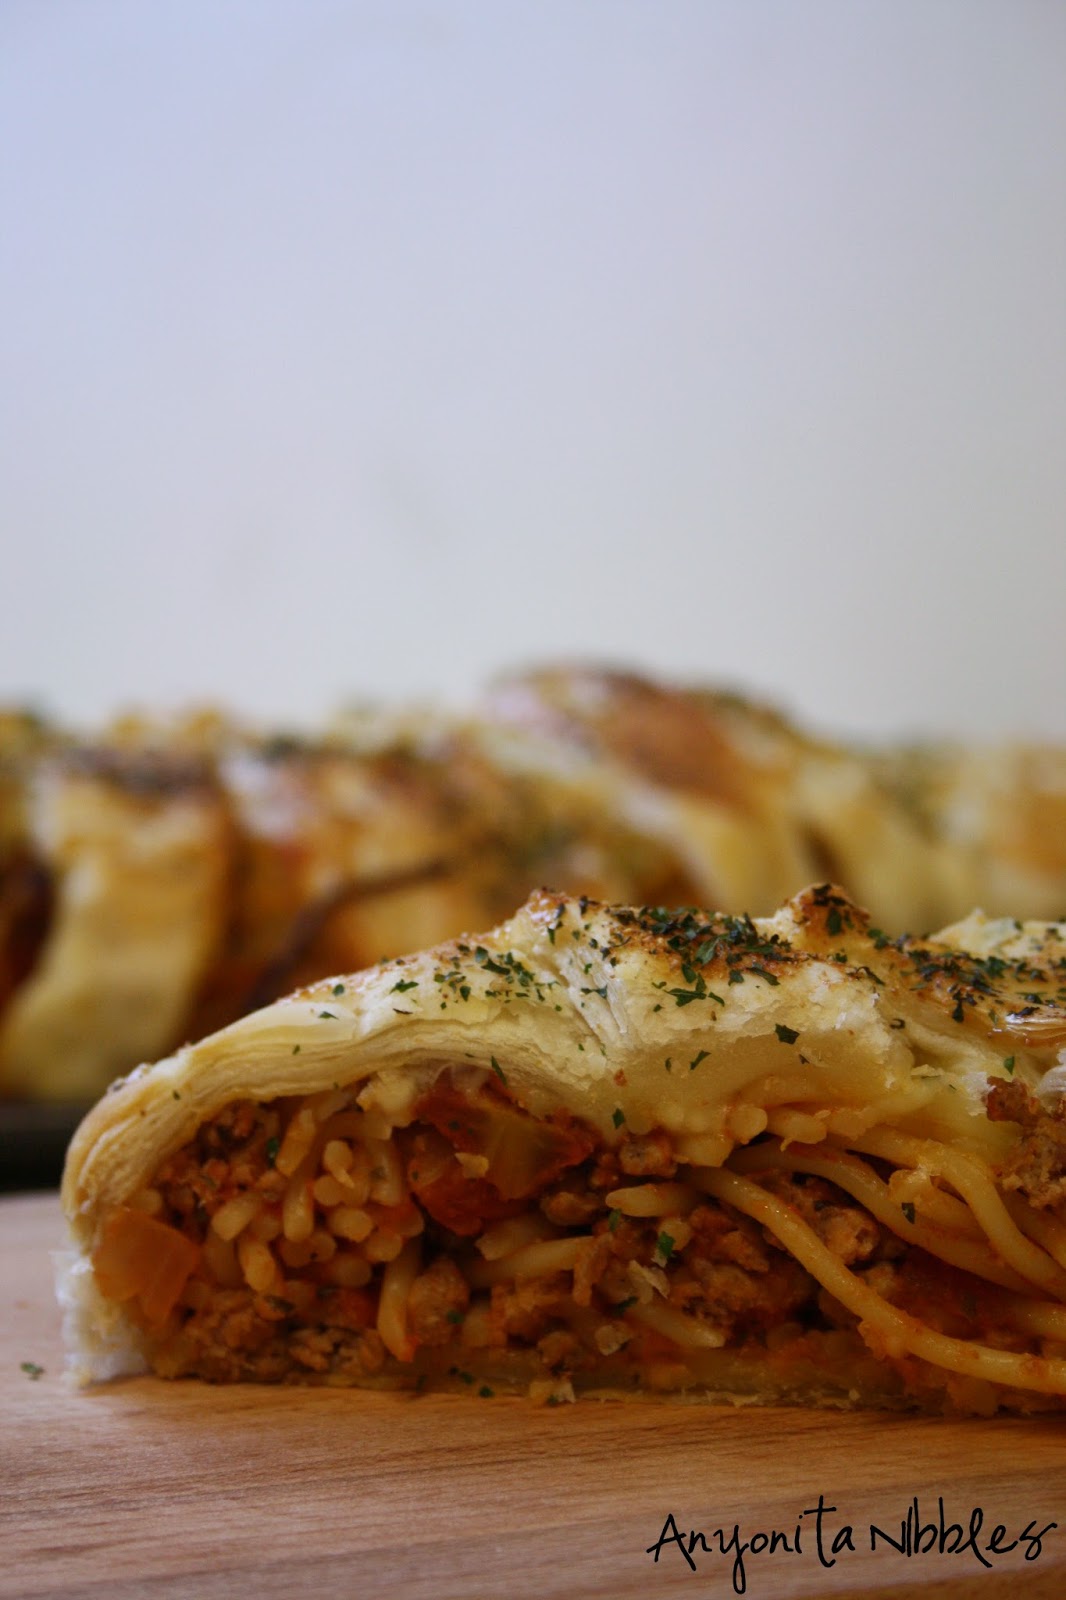 Spaghetti inside of garlicky puff pastry | Anyonita Nibbles